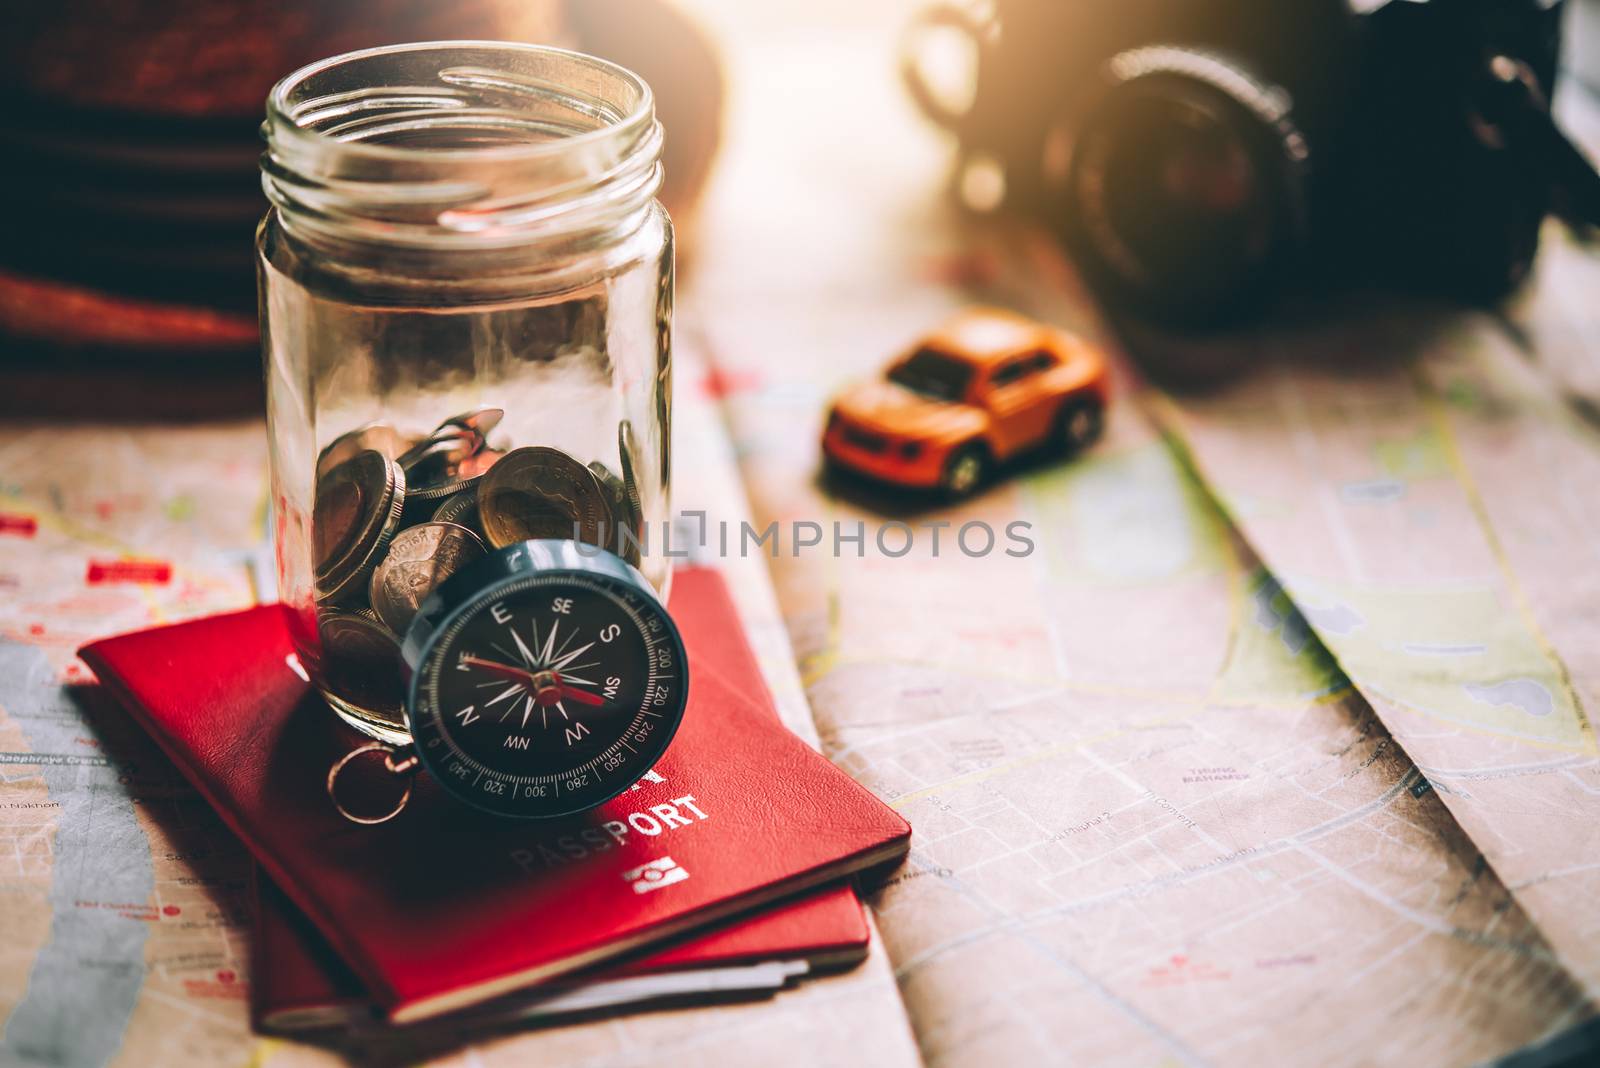 The money in the jar stored on the map, along with a passport, c by photobyphotoboy